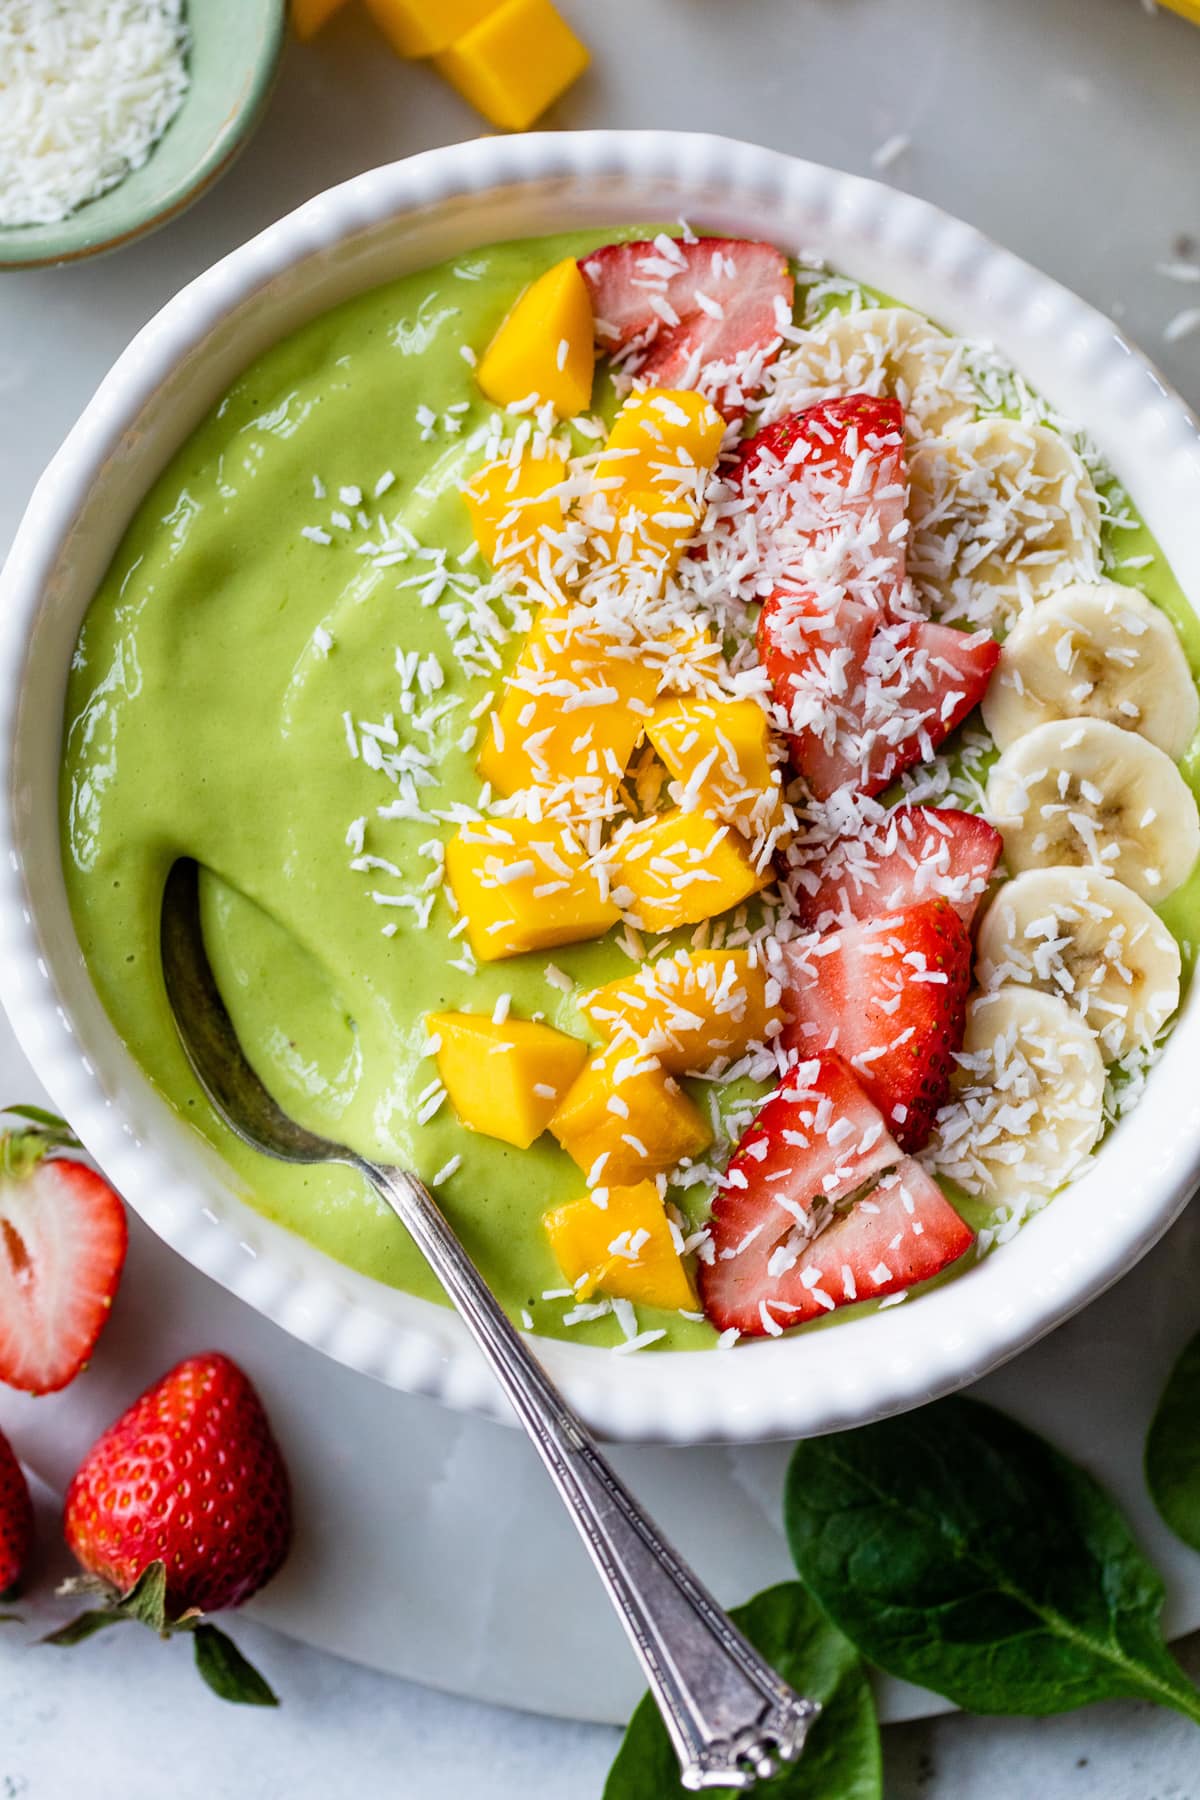 Smoothie Bowl with spinach, mango, strawberries and banana